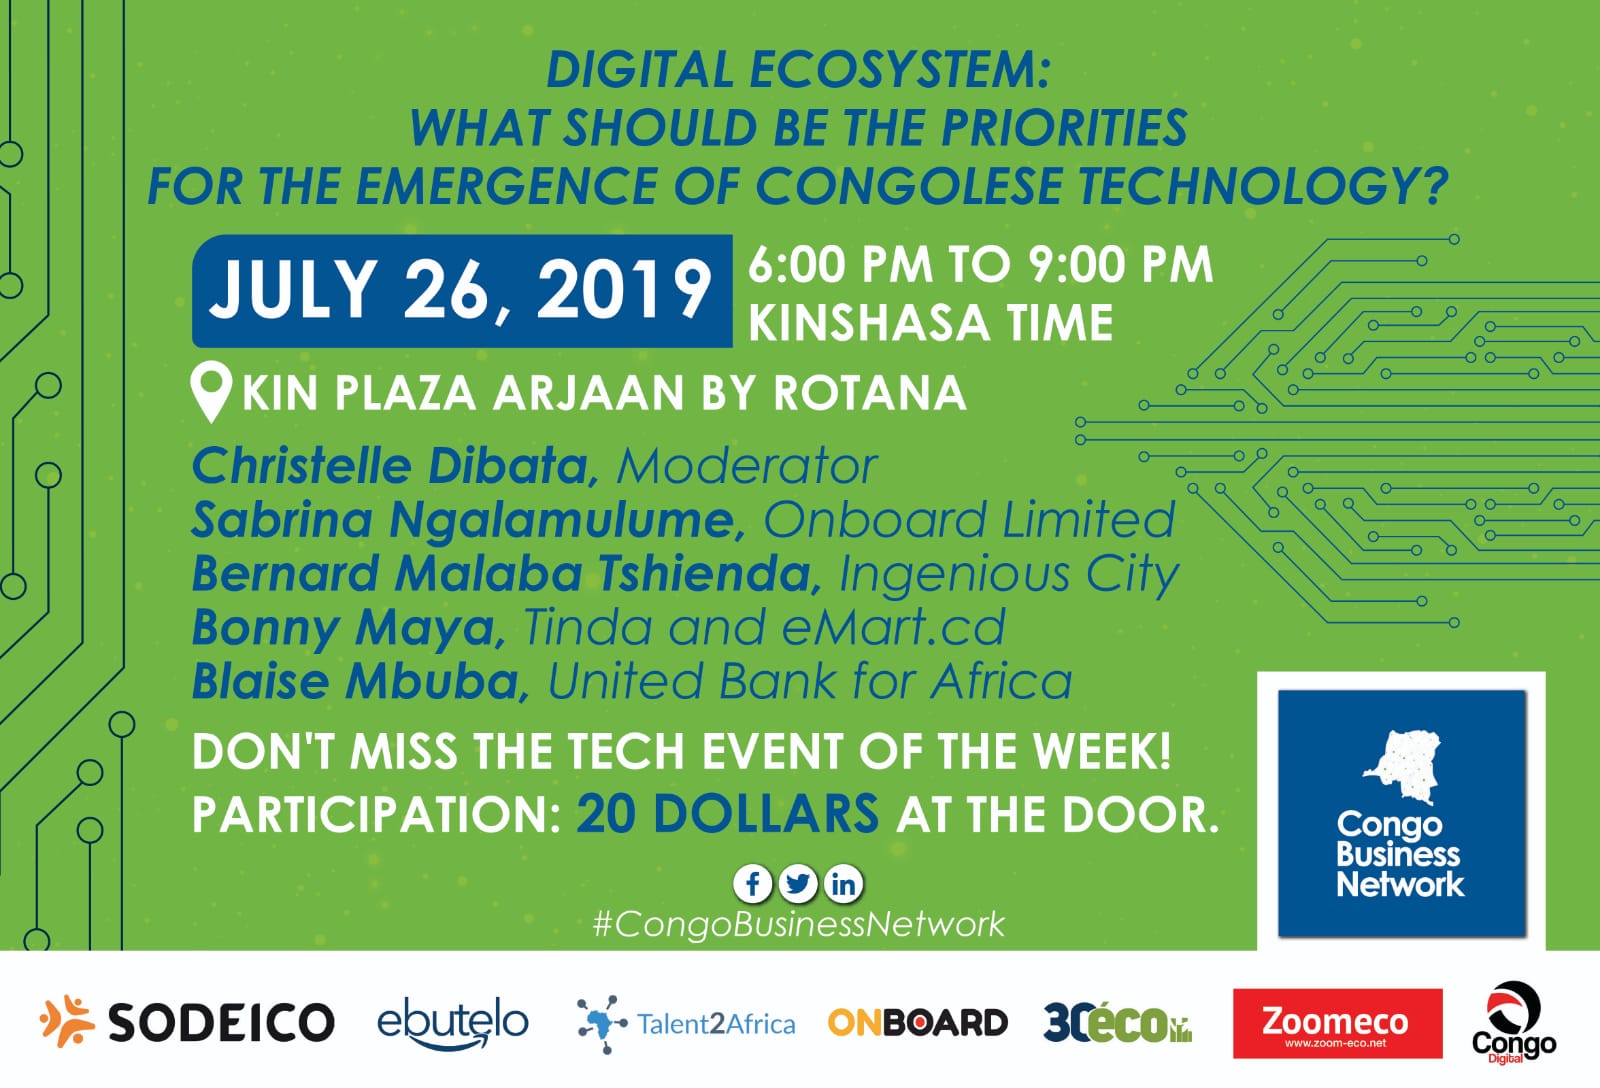 Kinshasa: "digital ecosystem" will be at the heart of Congo Business Network's event on July 26, 2019